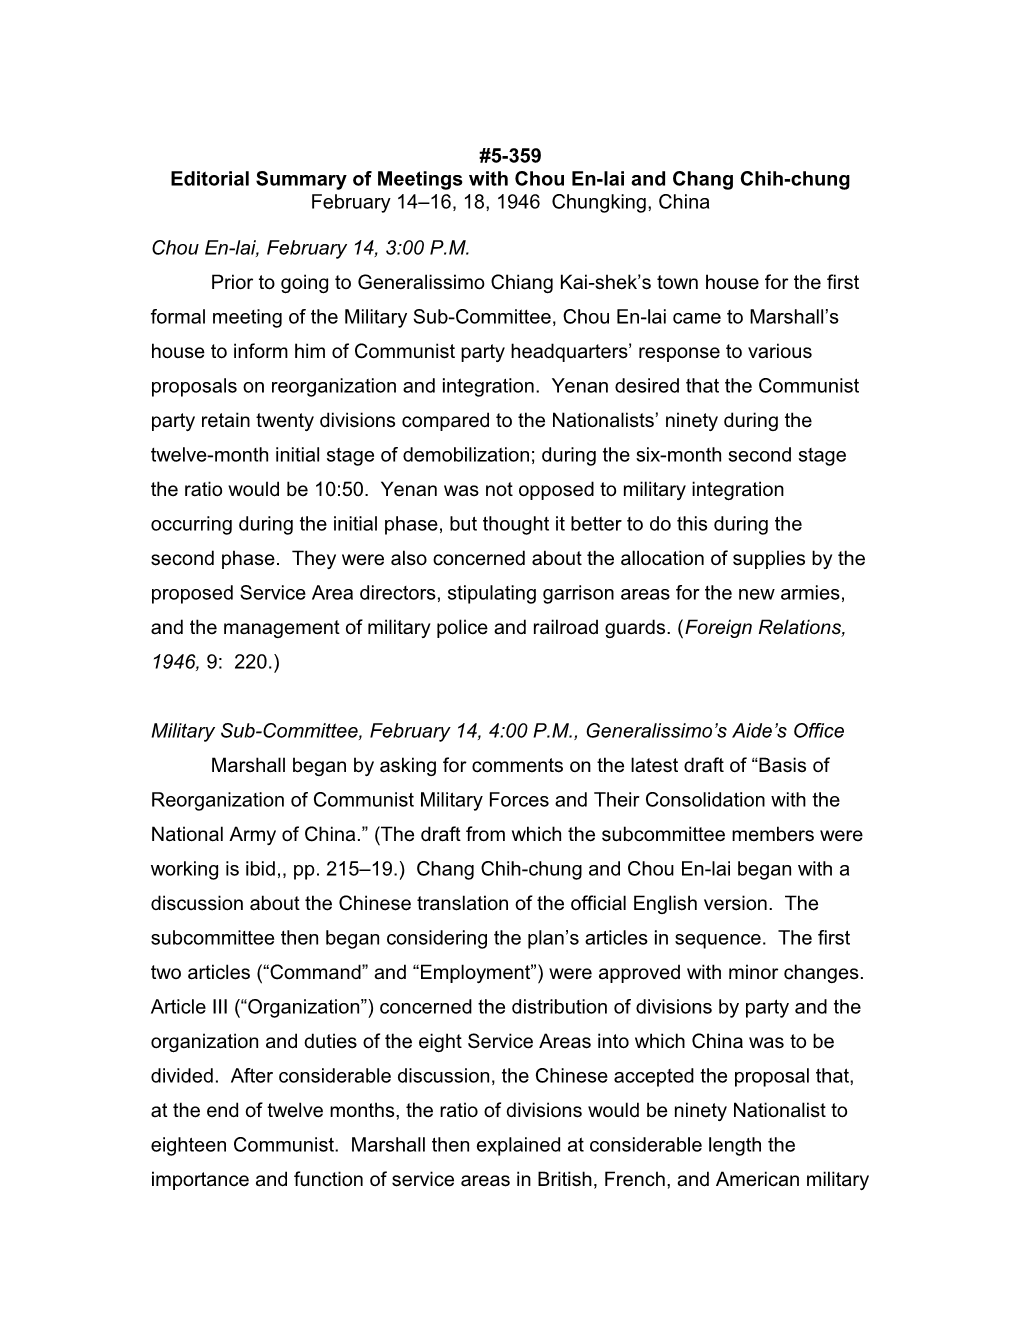 Editorial Summary of Meetings with Chou En-Lai and Chang Chih-Chung